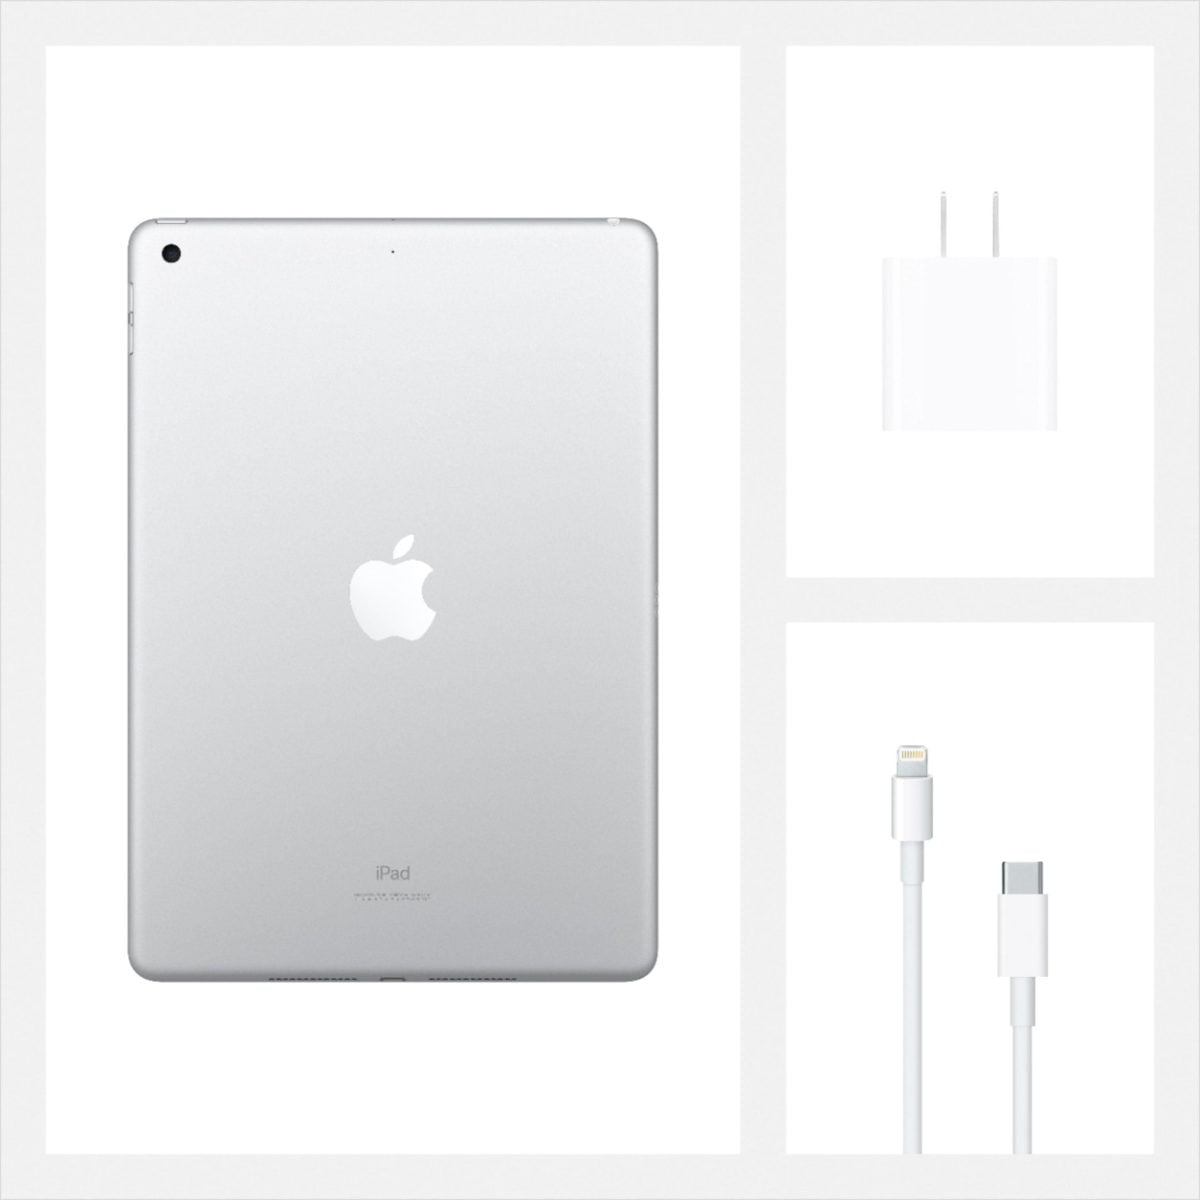 5199800Cv16D Scaled Apple &Lt;H1&Gt;Apple - 10.2-Inch Ipad - Latest Model - (8Th Generation) With Wi-Fi - 32Gb - Silver&Lt;/H1&Gt; &Lt;Div Class=&Quot;Product-Description&Quot;&Gt;The New Ipad. It'S Your Digital Notebook, Mobile Office, Photo Studio, Game Console, And Personal Cinema. With The A12 Bionic Chip That Can Easily Power Essential Apps And Immersive Games. So You Can Edit A Document While Researching On The Web And Making A Facetime Call To A Colleague At The Same Time. Apple Pencil Makes Note-Taking With Ipad A Breeze.¹ Attach A Full-Size Smart Keyboard For Comfortable Typing.¹ And Go Further With Wi-Fi And Gigabit-Class Lte² And All-Day Battery Life.³&Lt;/Div&Gt; Apple Apple - 10.2-Inch Ipad - Latest Model - (8Th Generation) With Wi-Fi - 32Gb - Silver